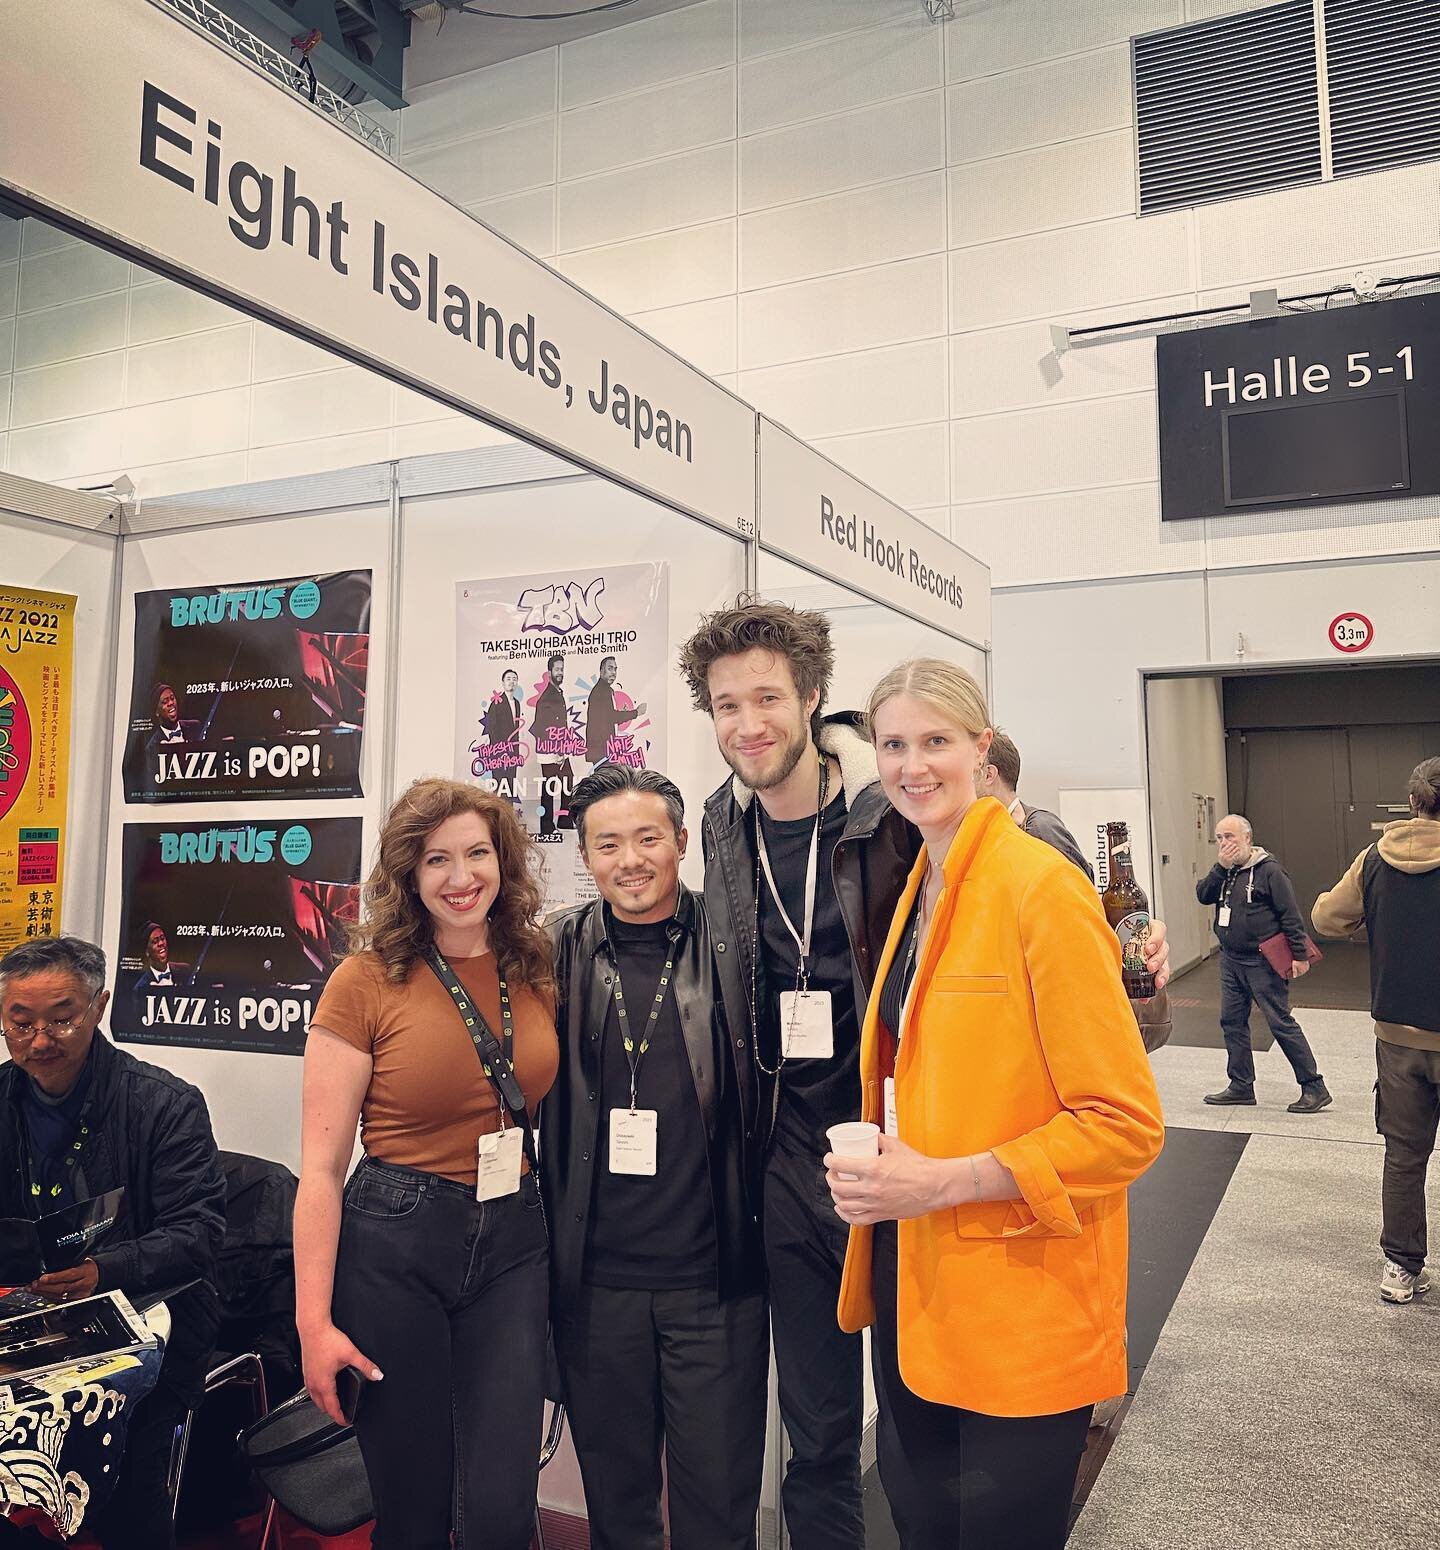 @jazzahead reunion in Bremen 🇩🇪
with @simonmoullier @kaisazz @lydia_liebs 🔥🔥🔥
Shout out to @eight.islands for representing jazz from Japan!!!

#jazzahead